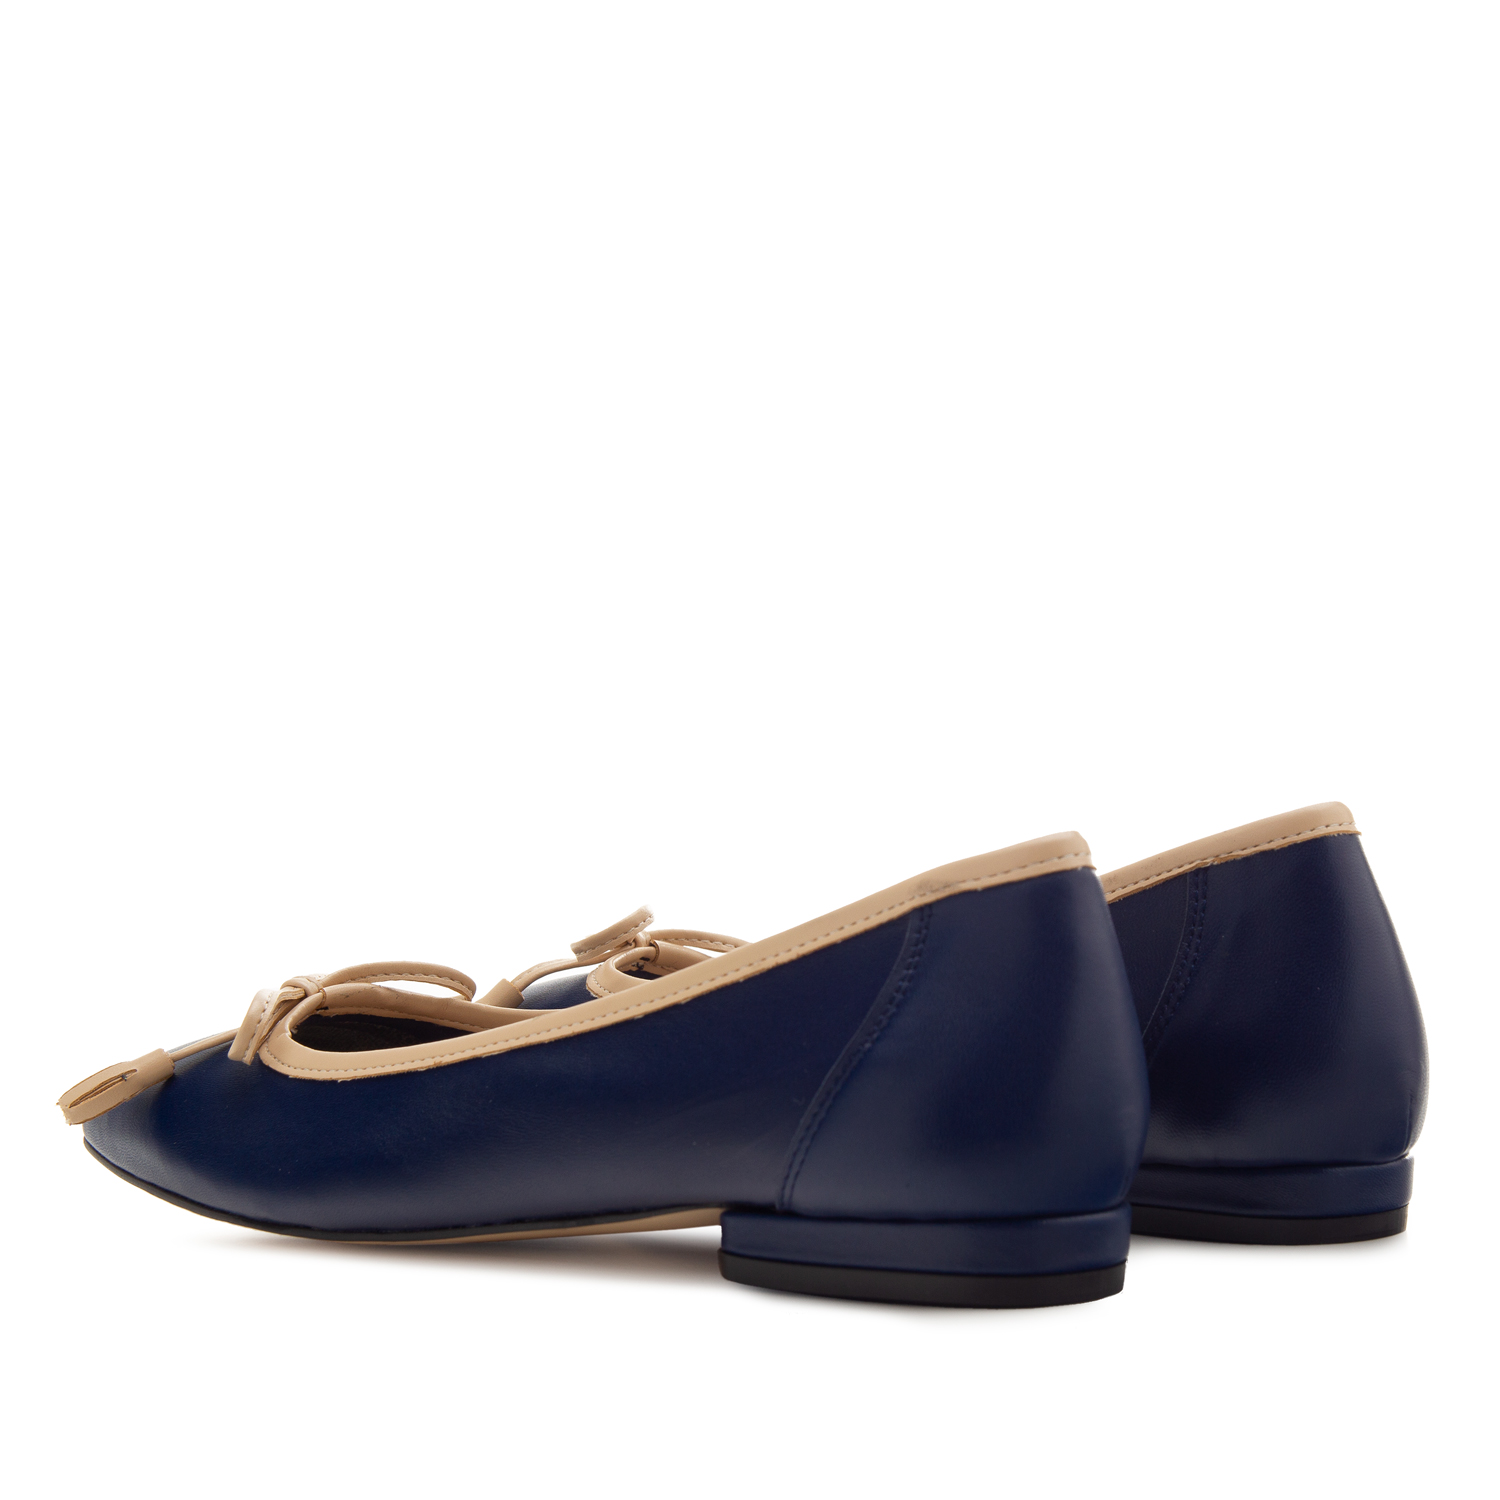 Bow Ballet Flats in Navy Leather 